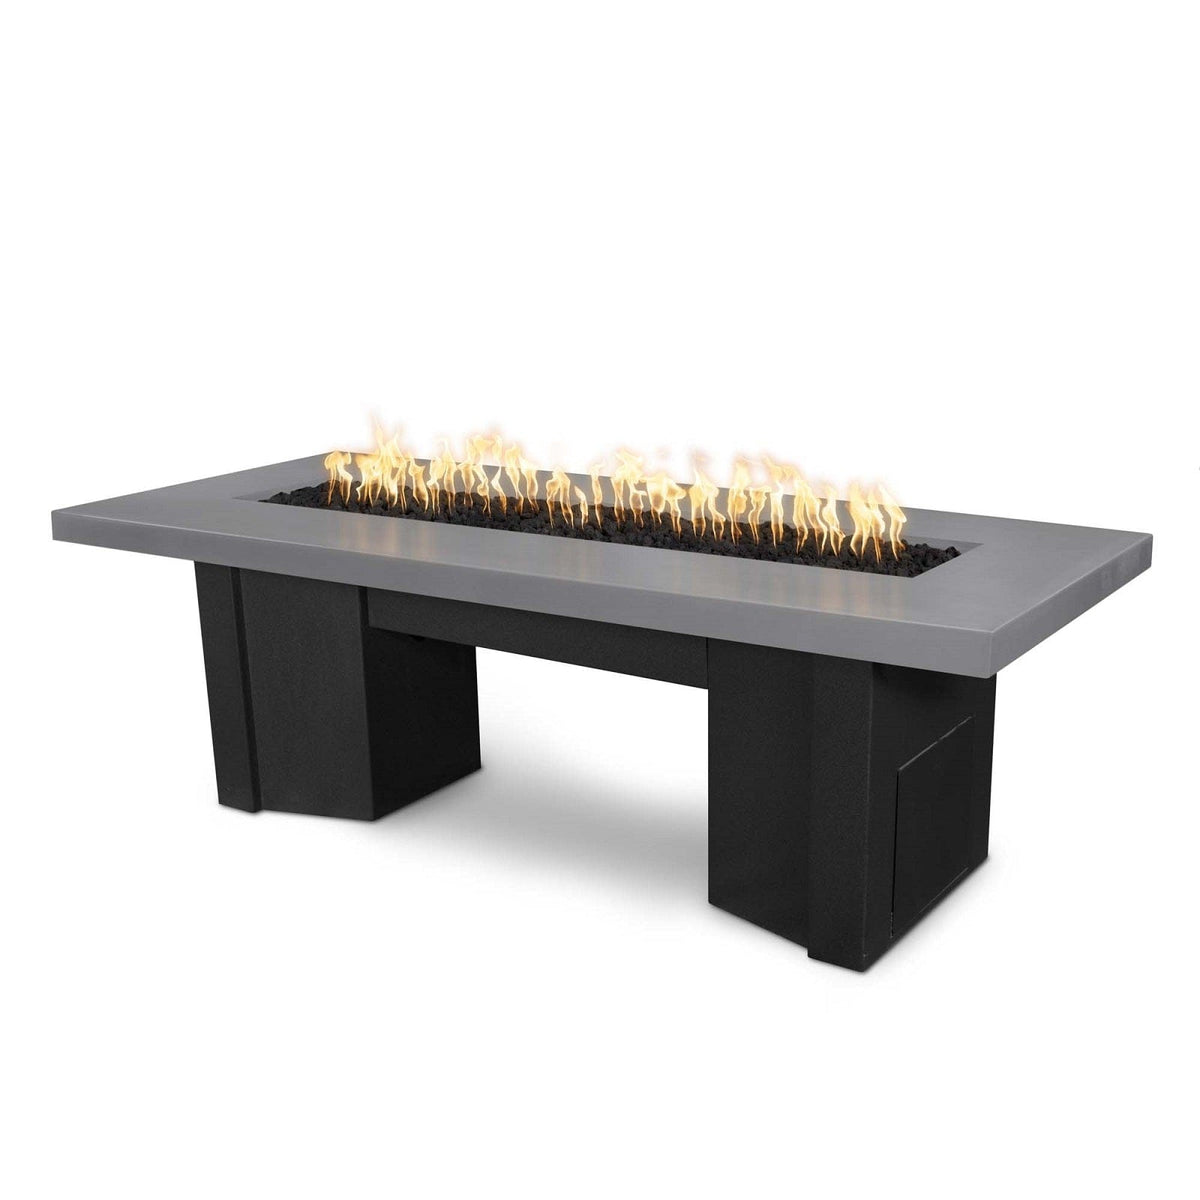 The Outdoor Plus Fire Features Natural Gray (-NGY) / Black Powder Coated Steel (-BLK) The Outdoor Plus 60&quot; Alameda Fire Table Smooth Concrete in Natural Gas - Match Lit with Flame Sense System / OPT-ALMGFRC60FSML-NG